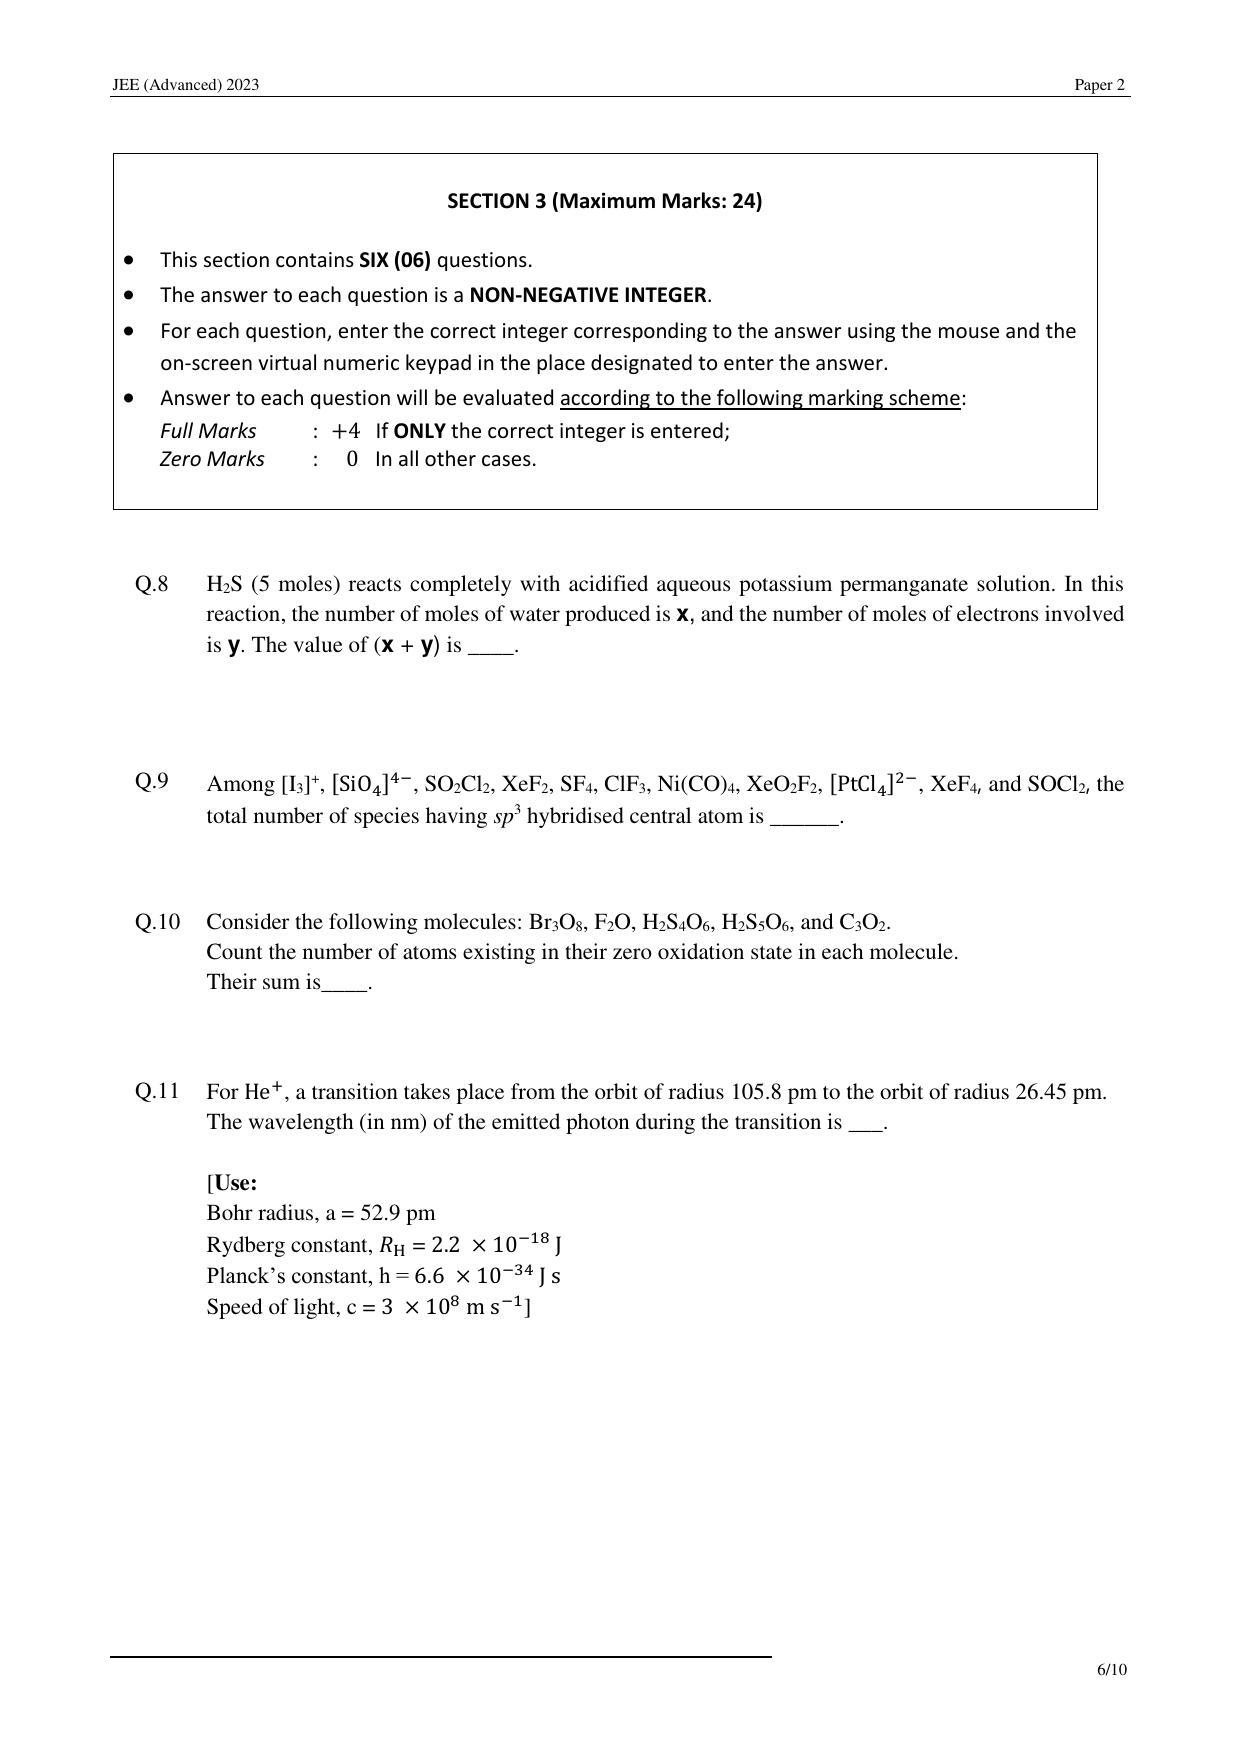 JEE (Advanced) 2023 Paper II - Mathematics Question Paper - Page 27